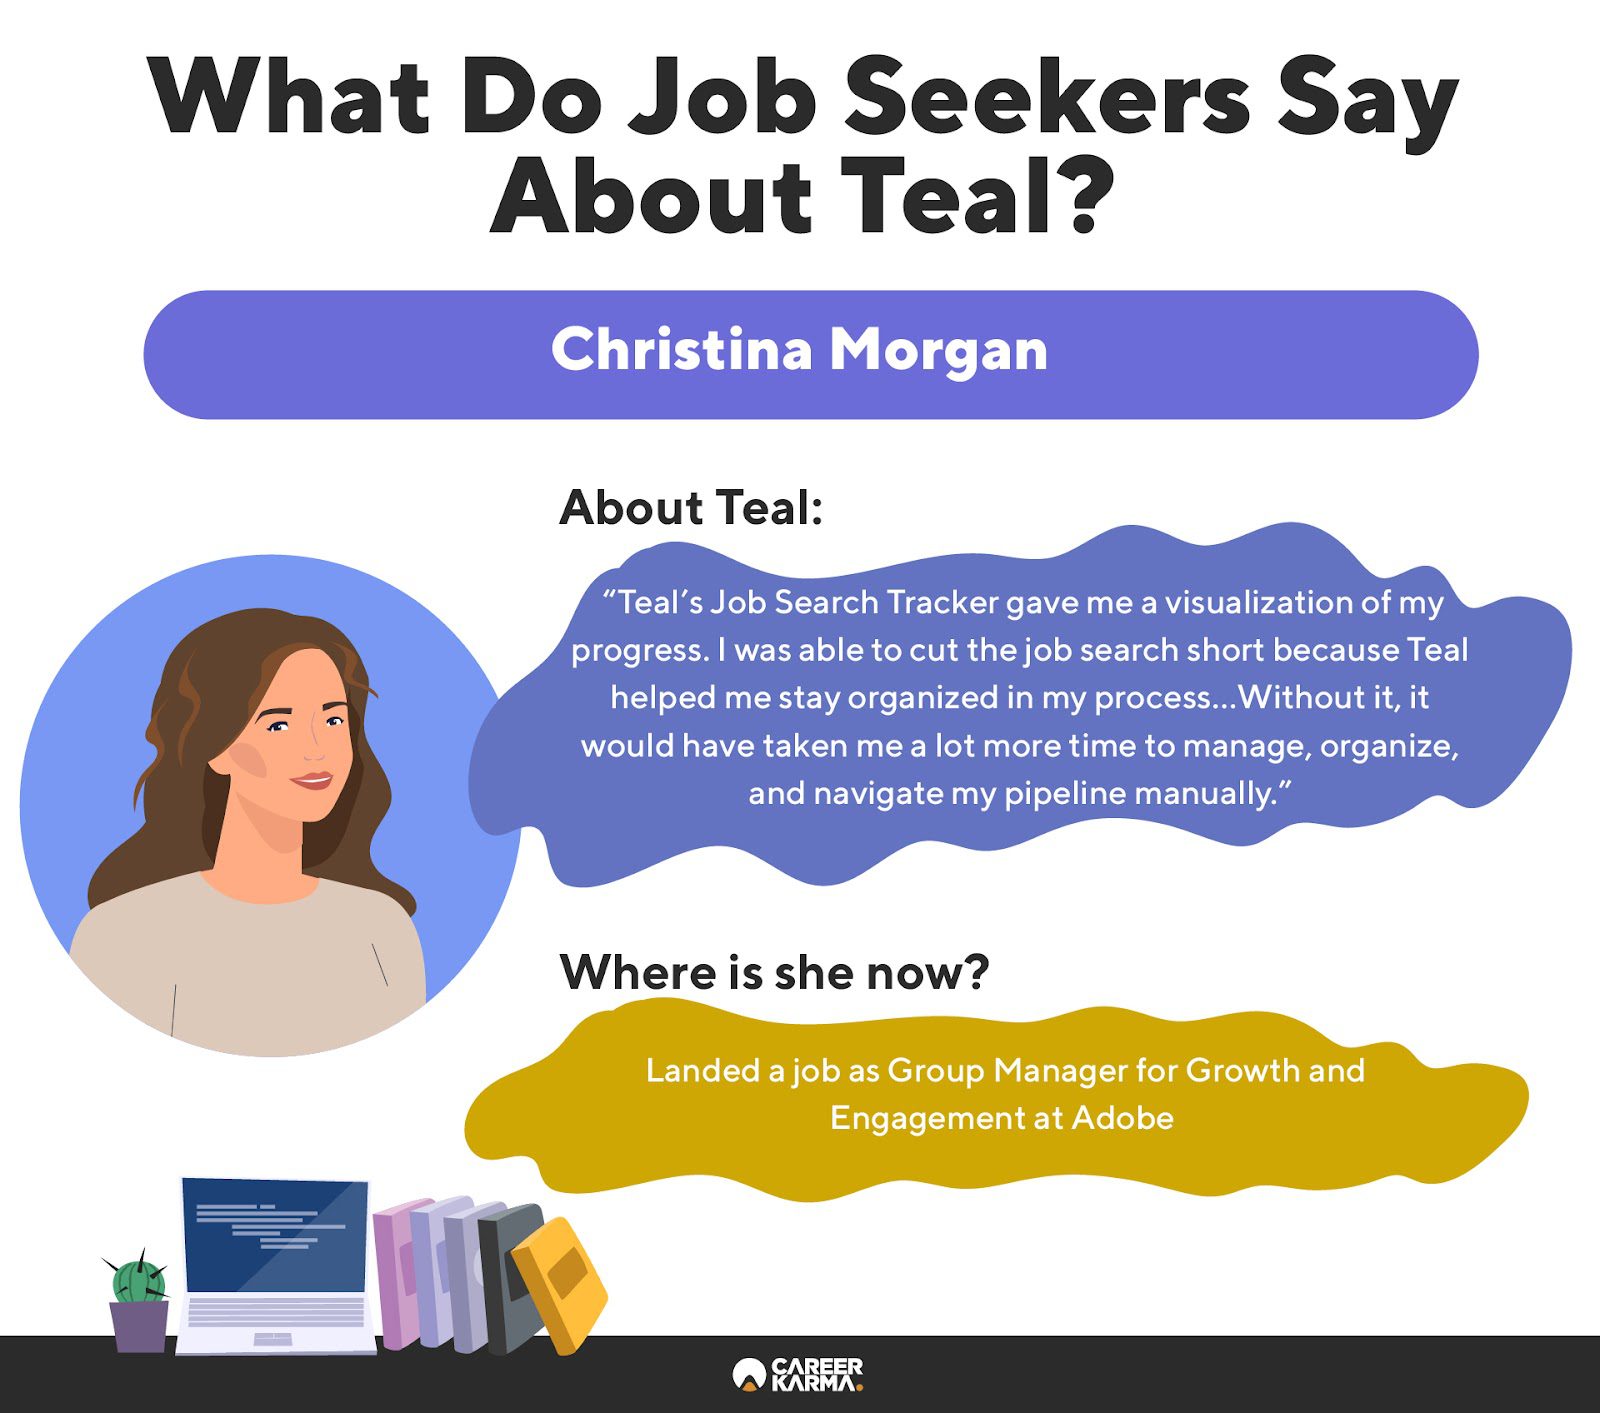 An infographic highlighting a former job seeker’s review of Teal